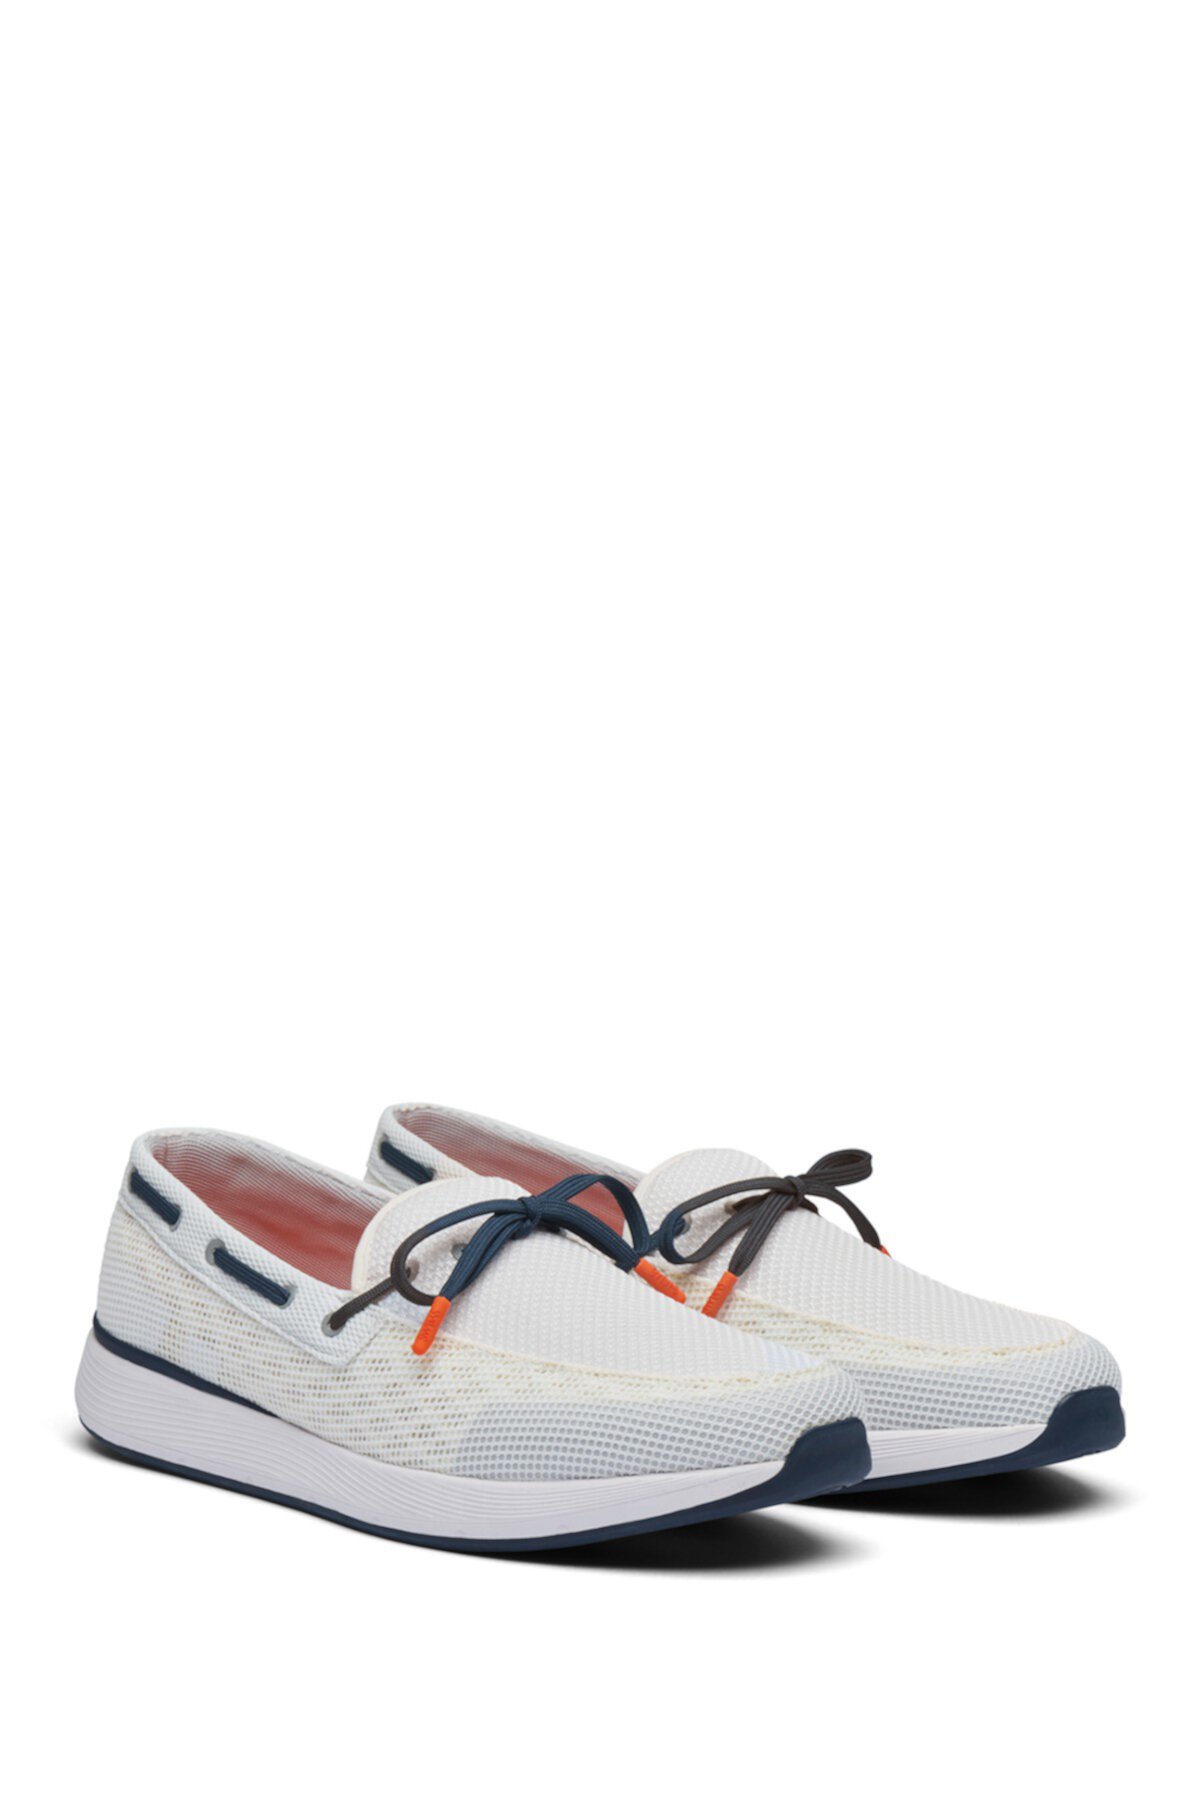 Breeze Wave Lace Loafer SWIMS